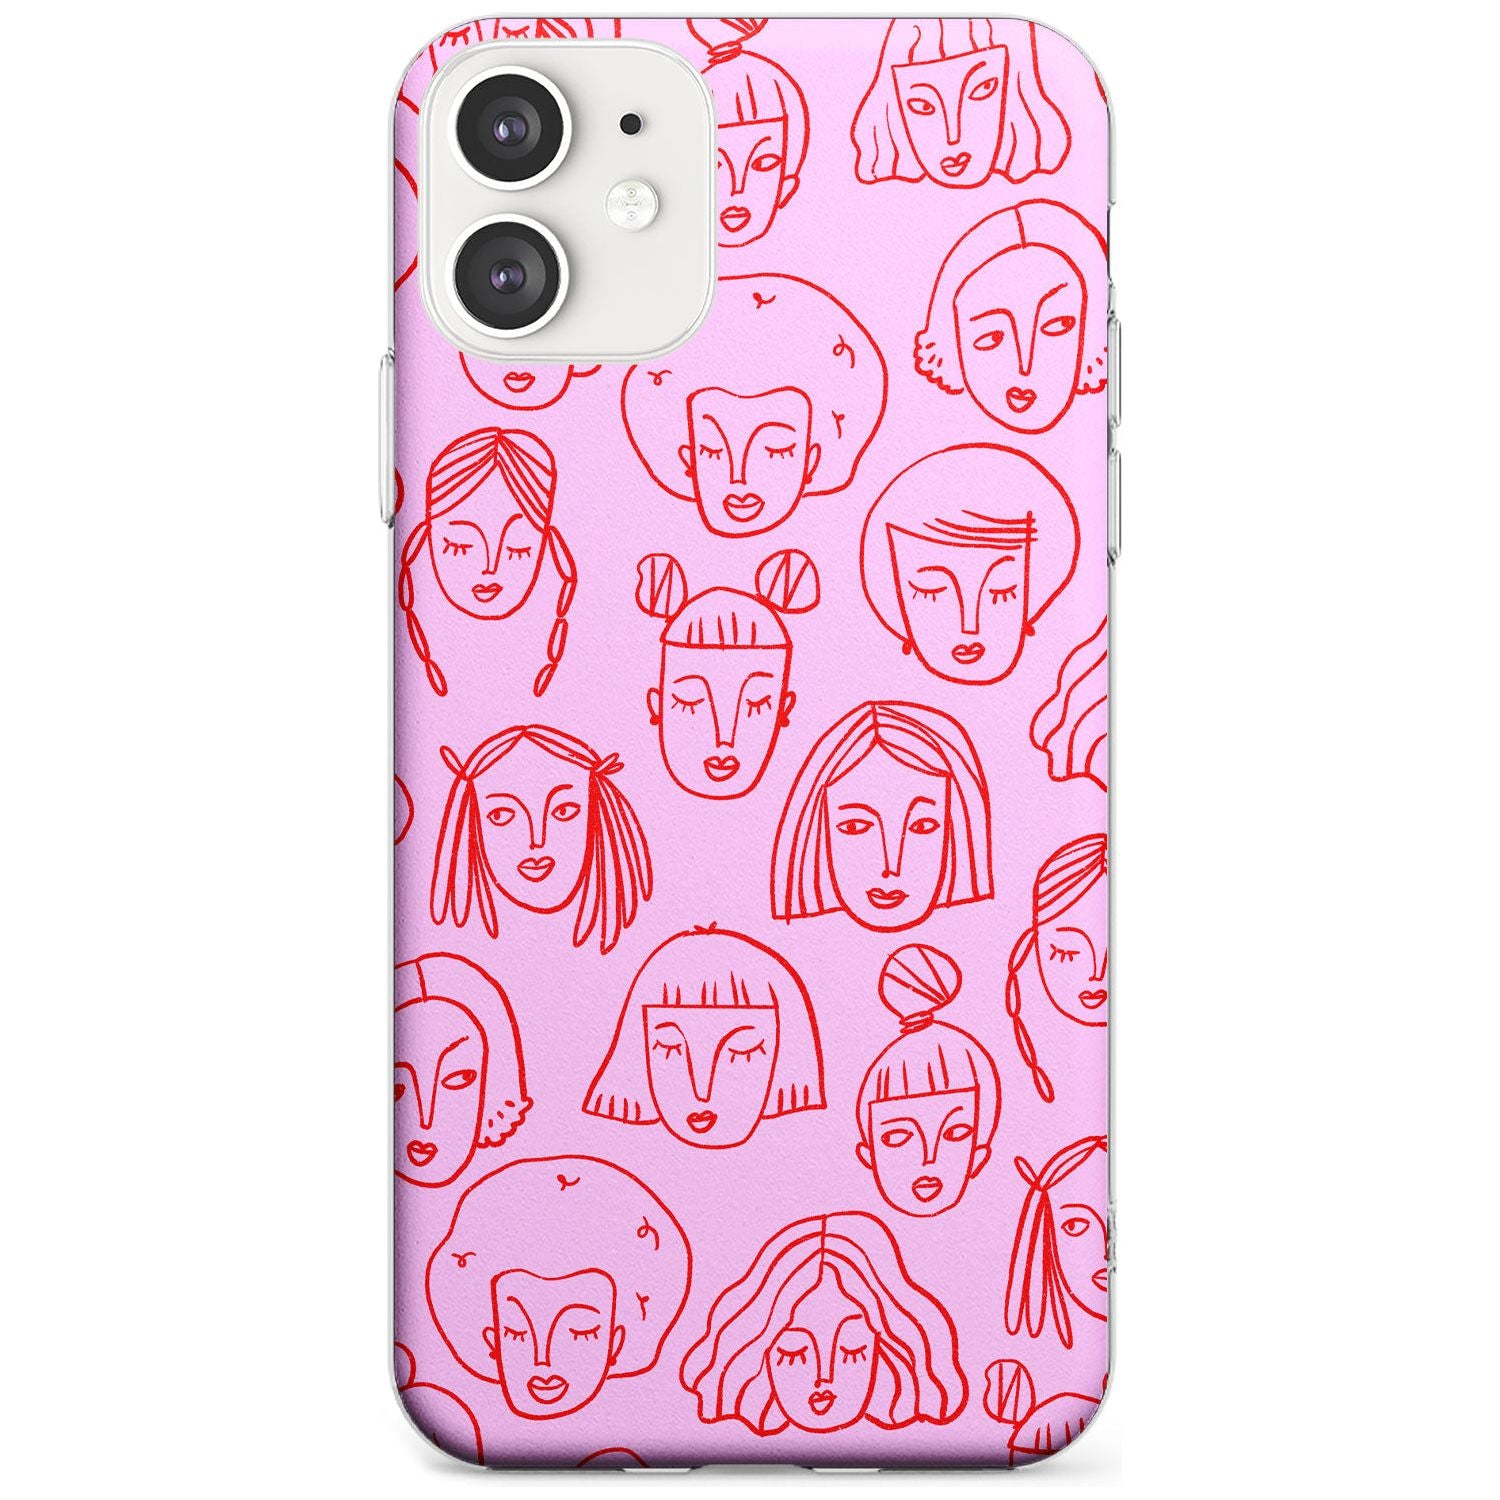 Girl Portrait Doodles in Pink & Red Slim TPU Phone Case for iPhone 11